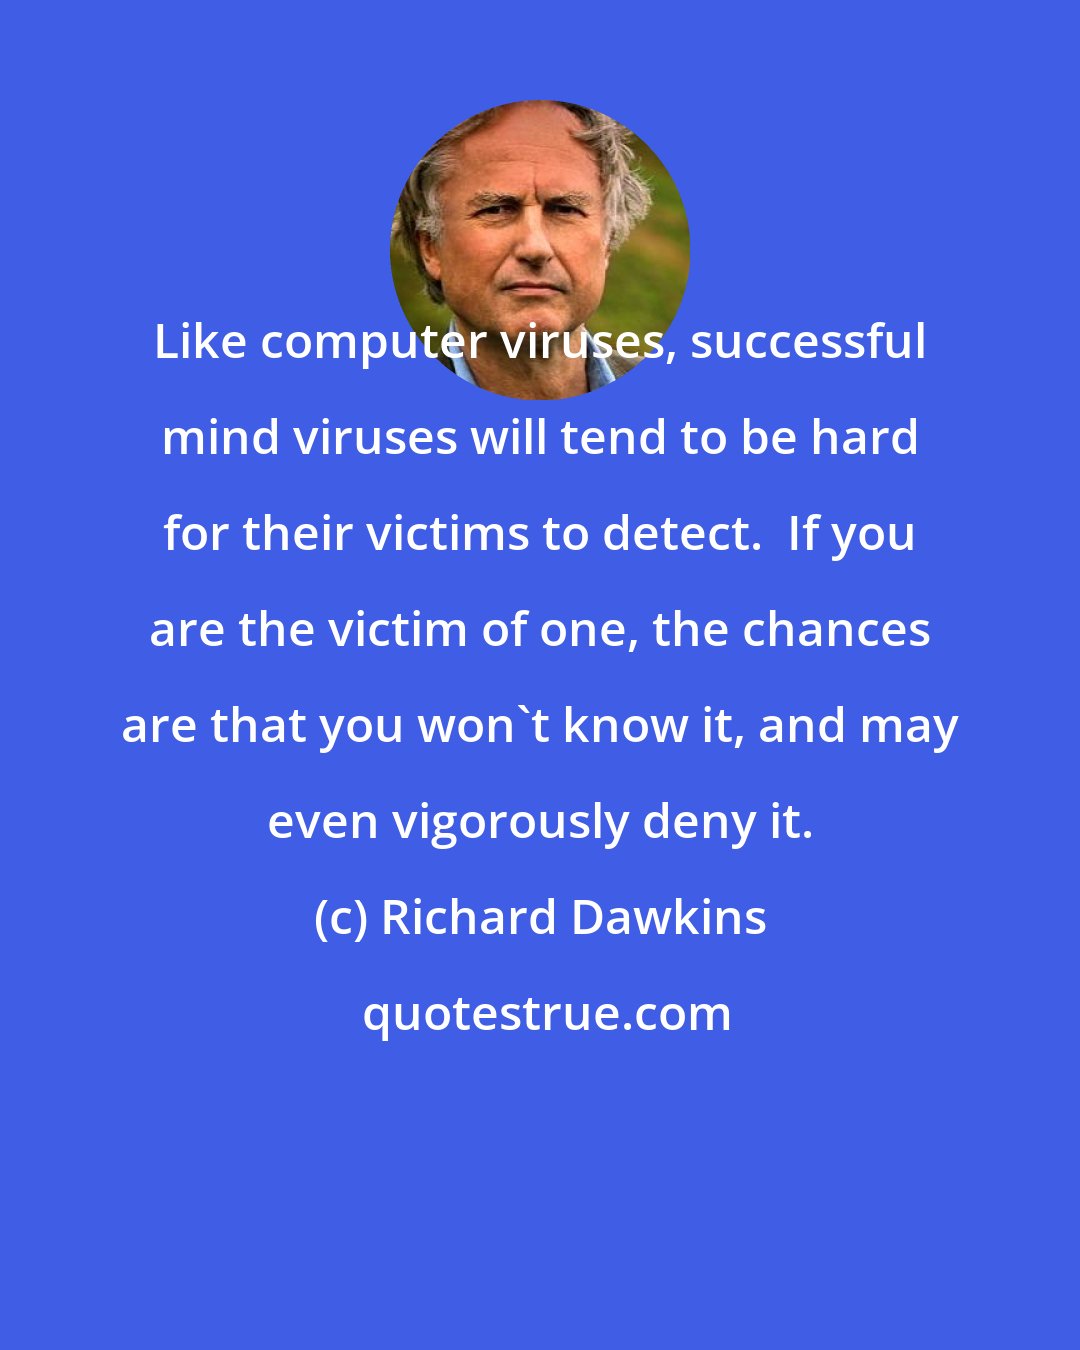 Richard Dawkins: Like computer viruses, successful mind viruses will tend to be hard for their victims to detect.  If you are the victim of one, the chances are that you won't know it, and may even vigorously deny it.